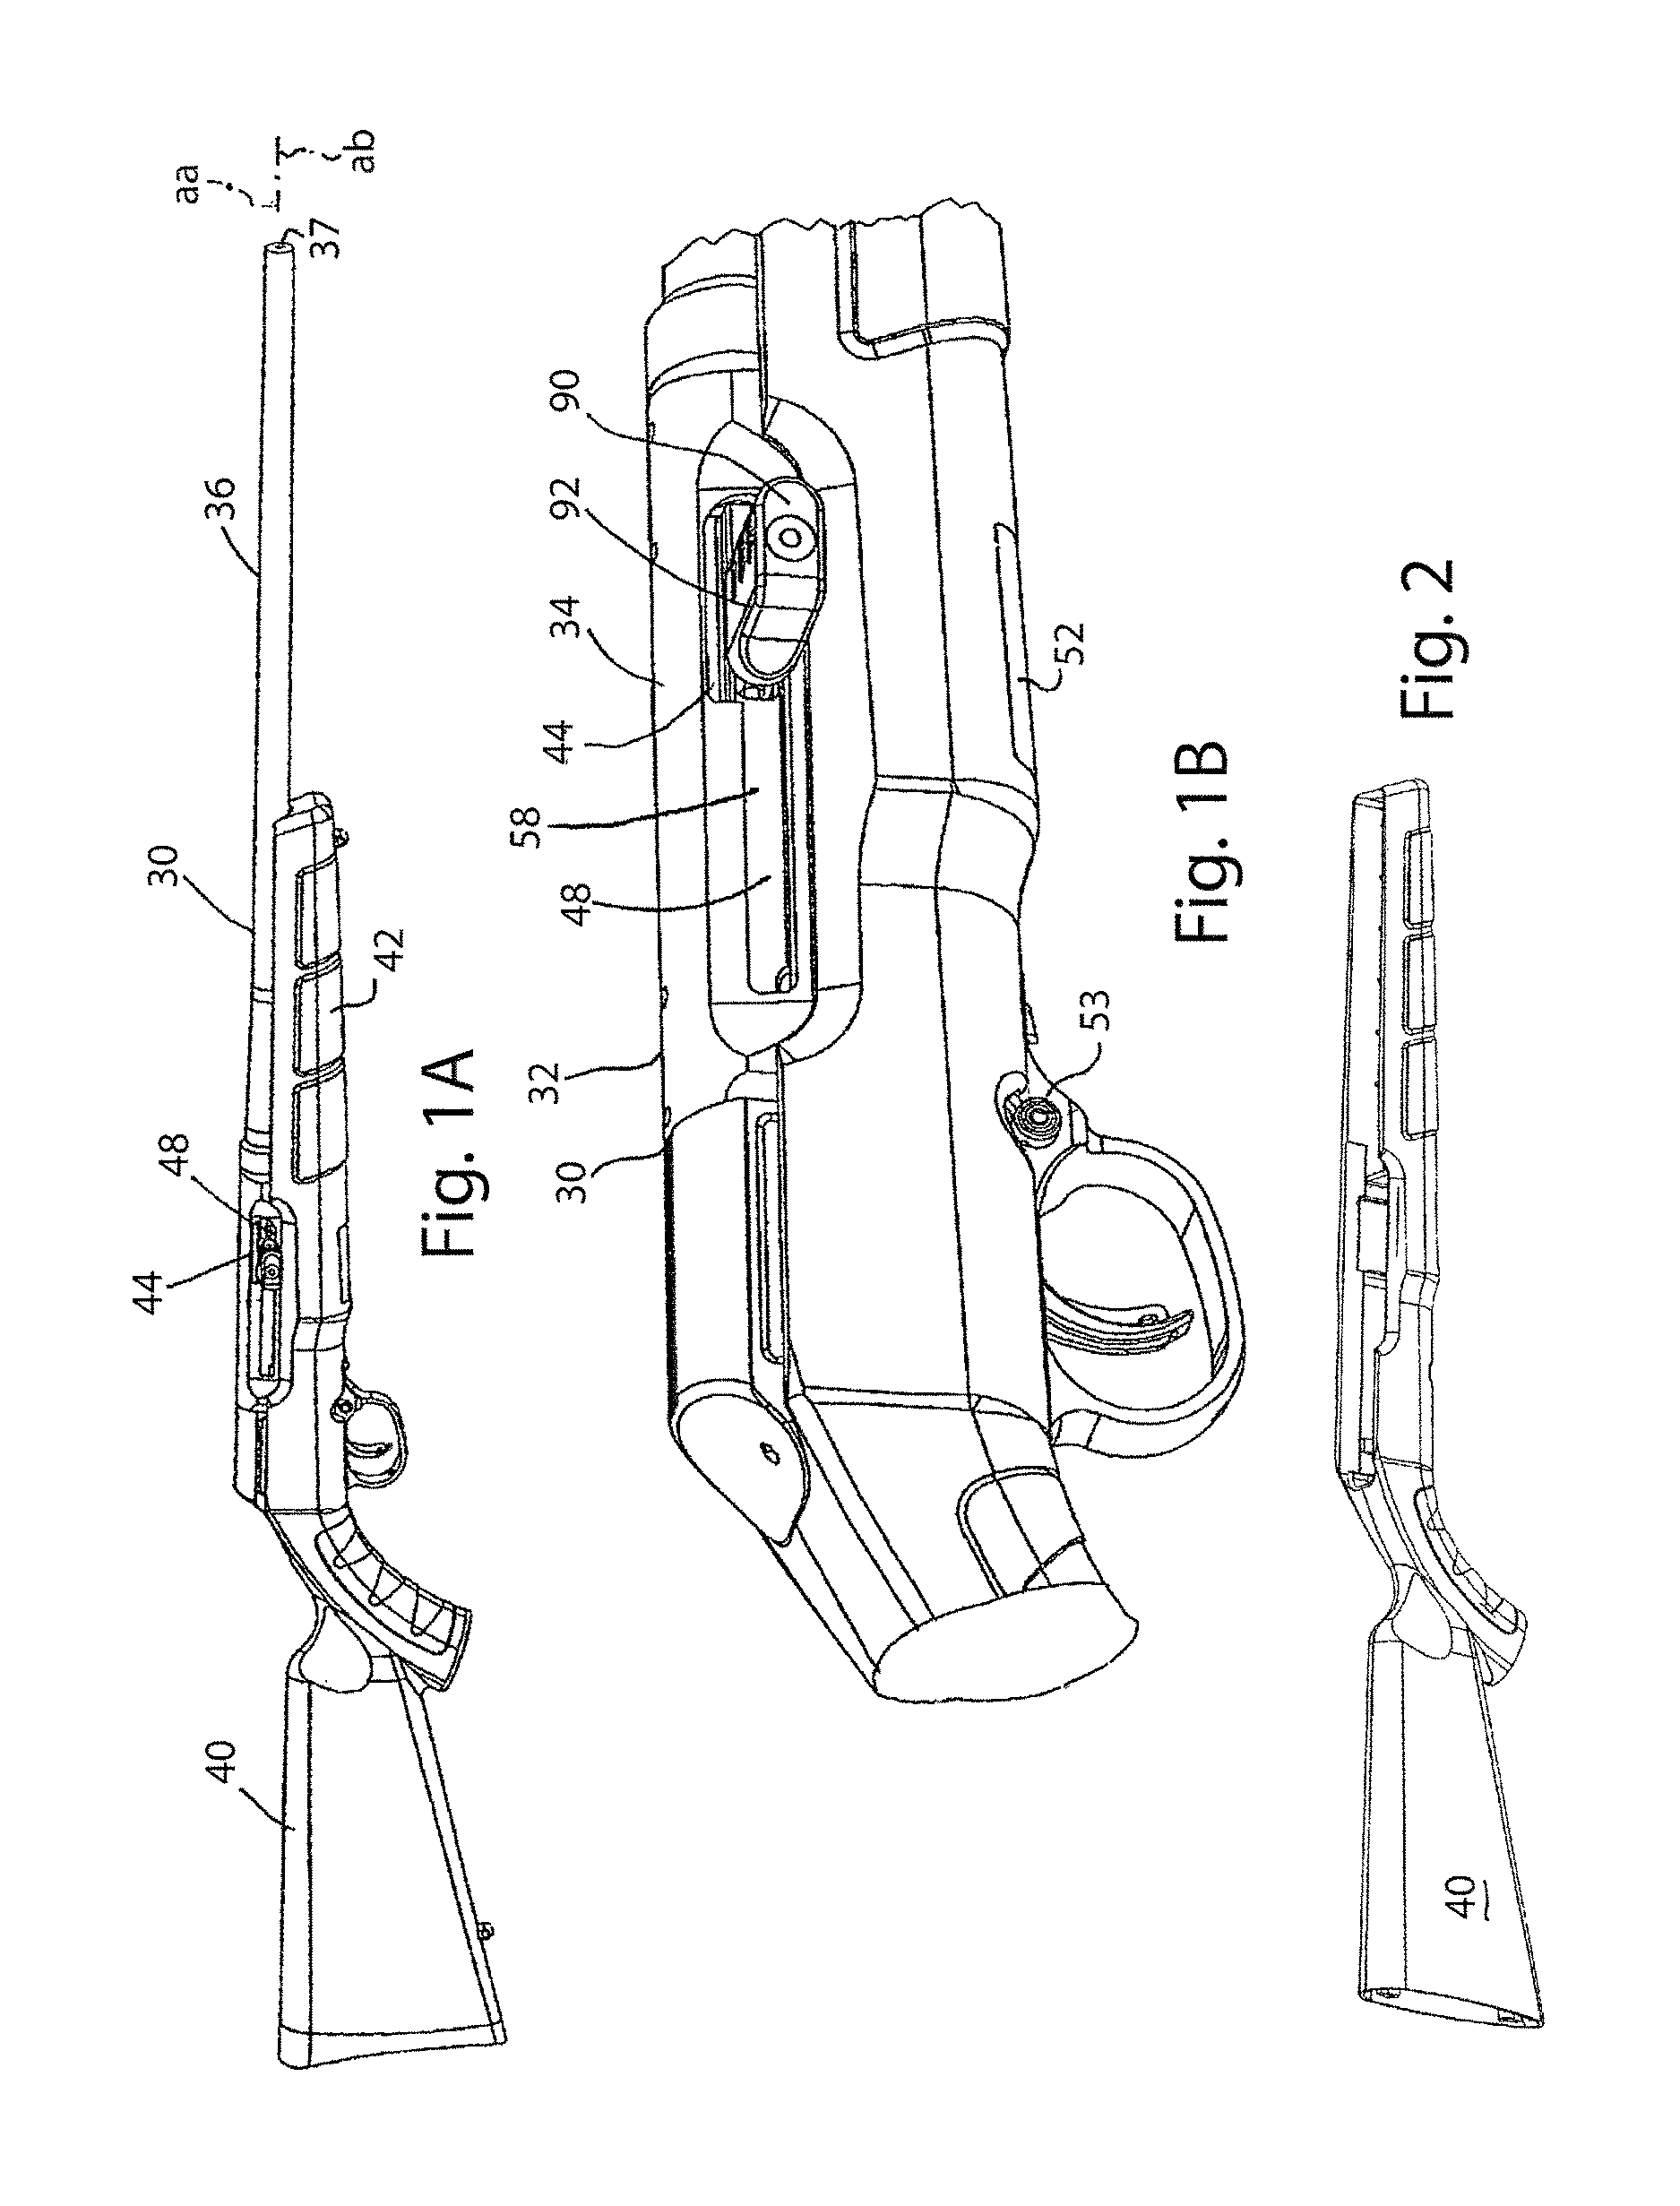 Firearm with reciprocating bolt assembly